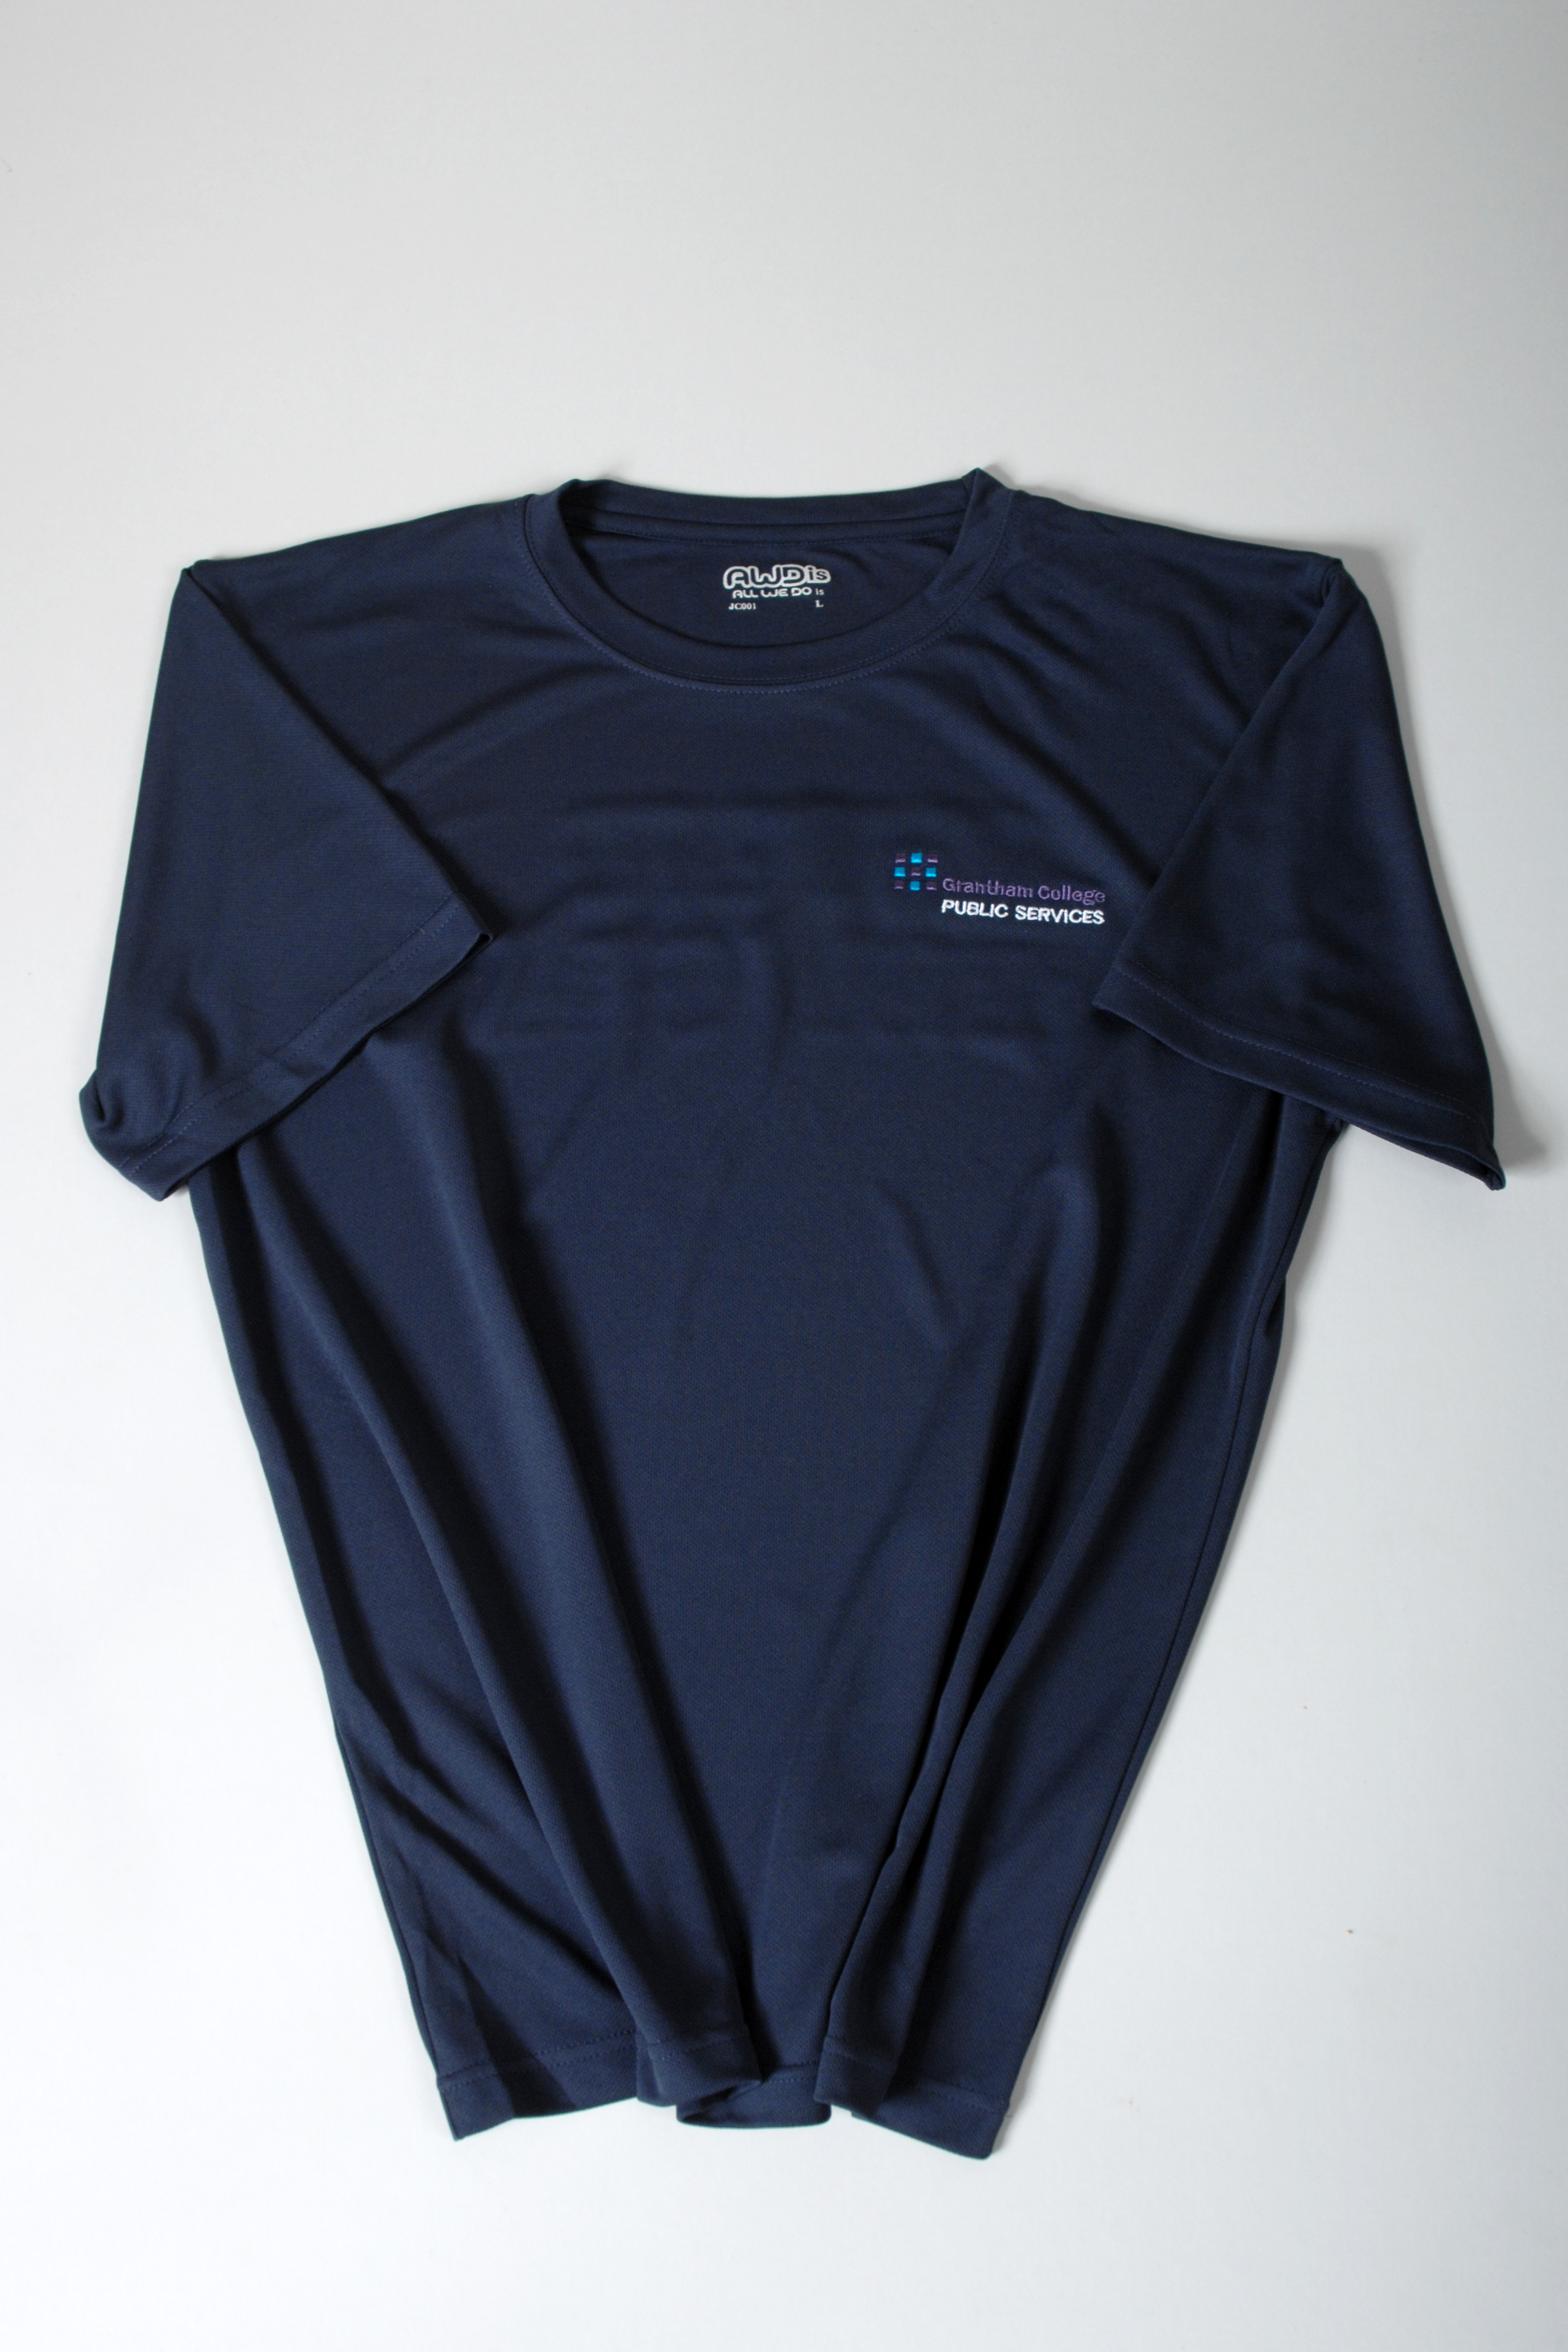 Dry Wicking T Shirt (Mens/Unisex Fit) - XS (to fit Chest 35")